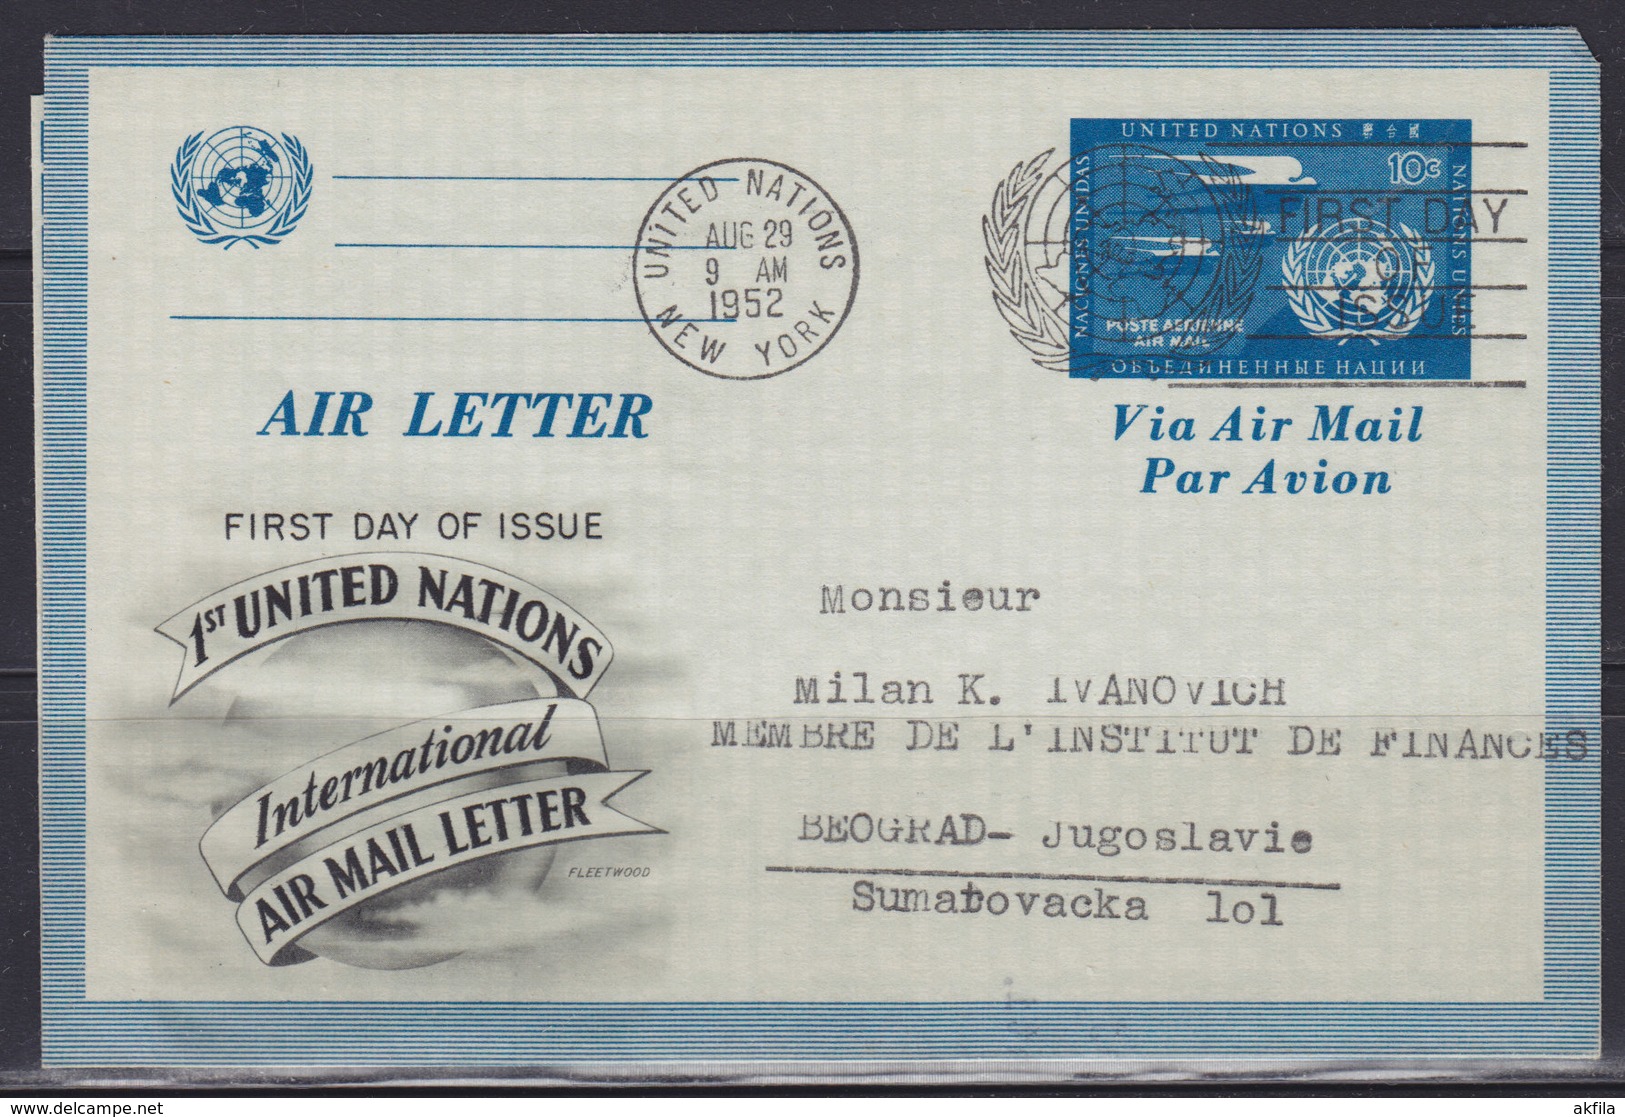 United Nations (New York) 29.VIII.1952 Air Letter - 1st United Nations International Air Mail Letter - Luftpost